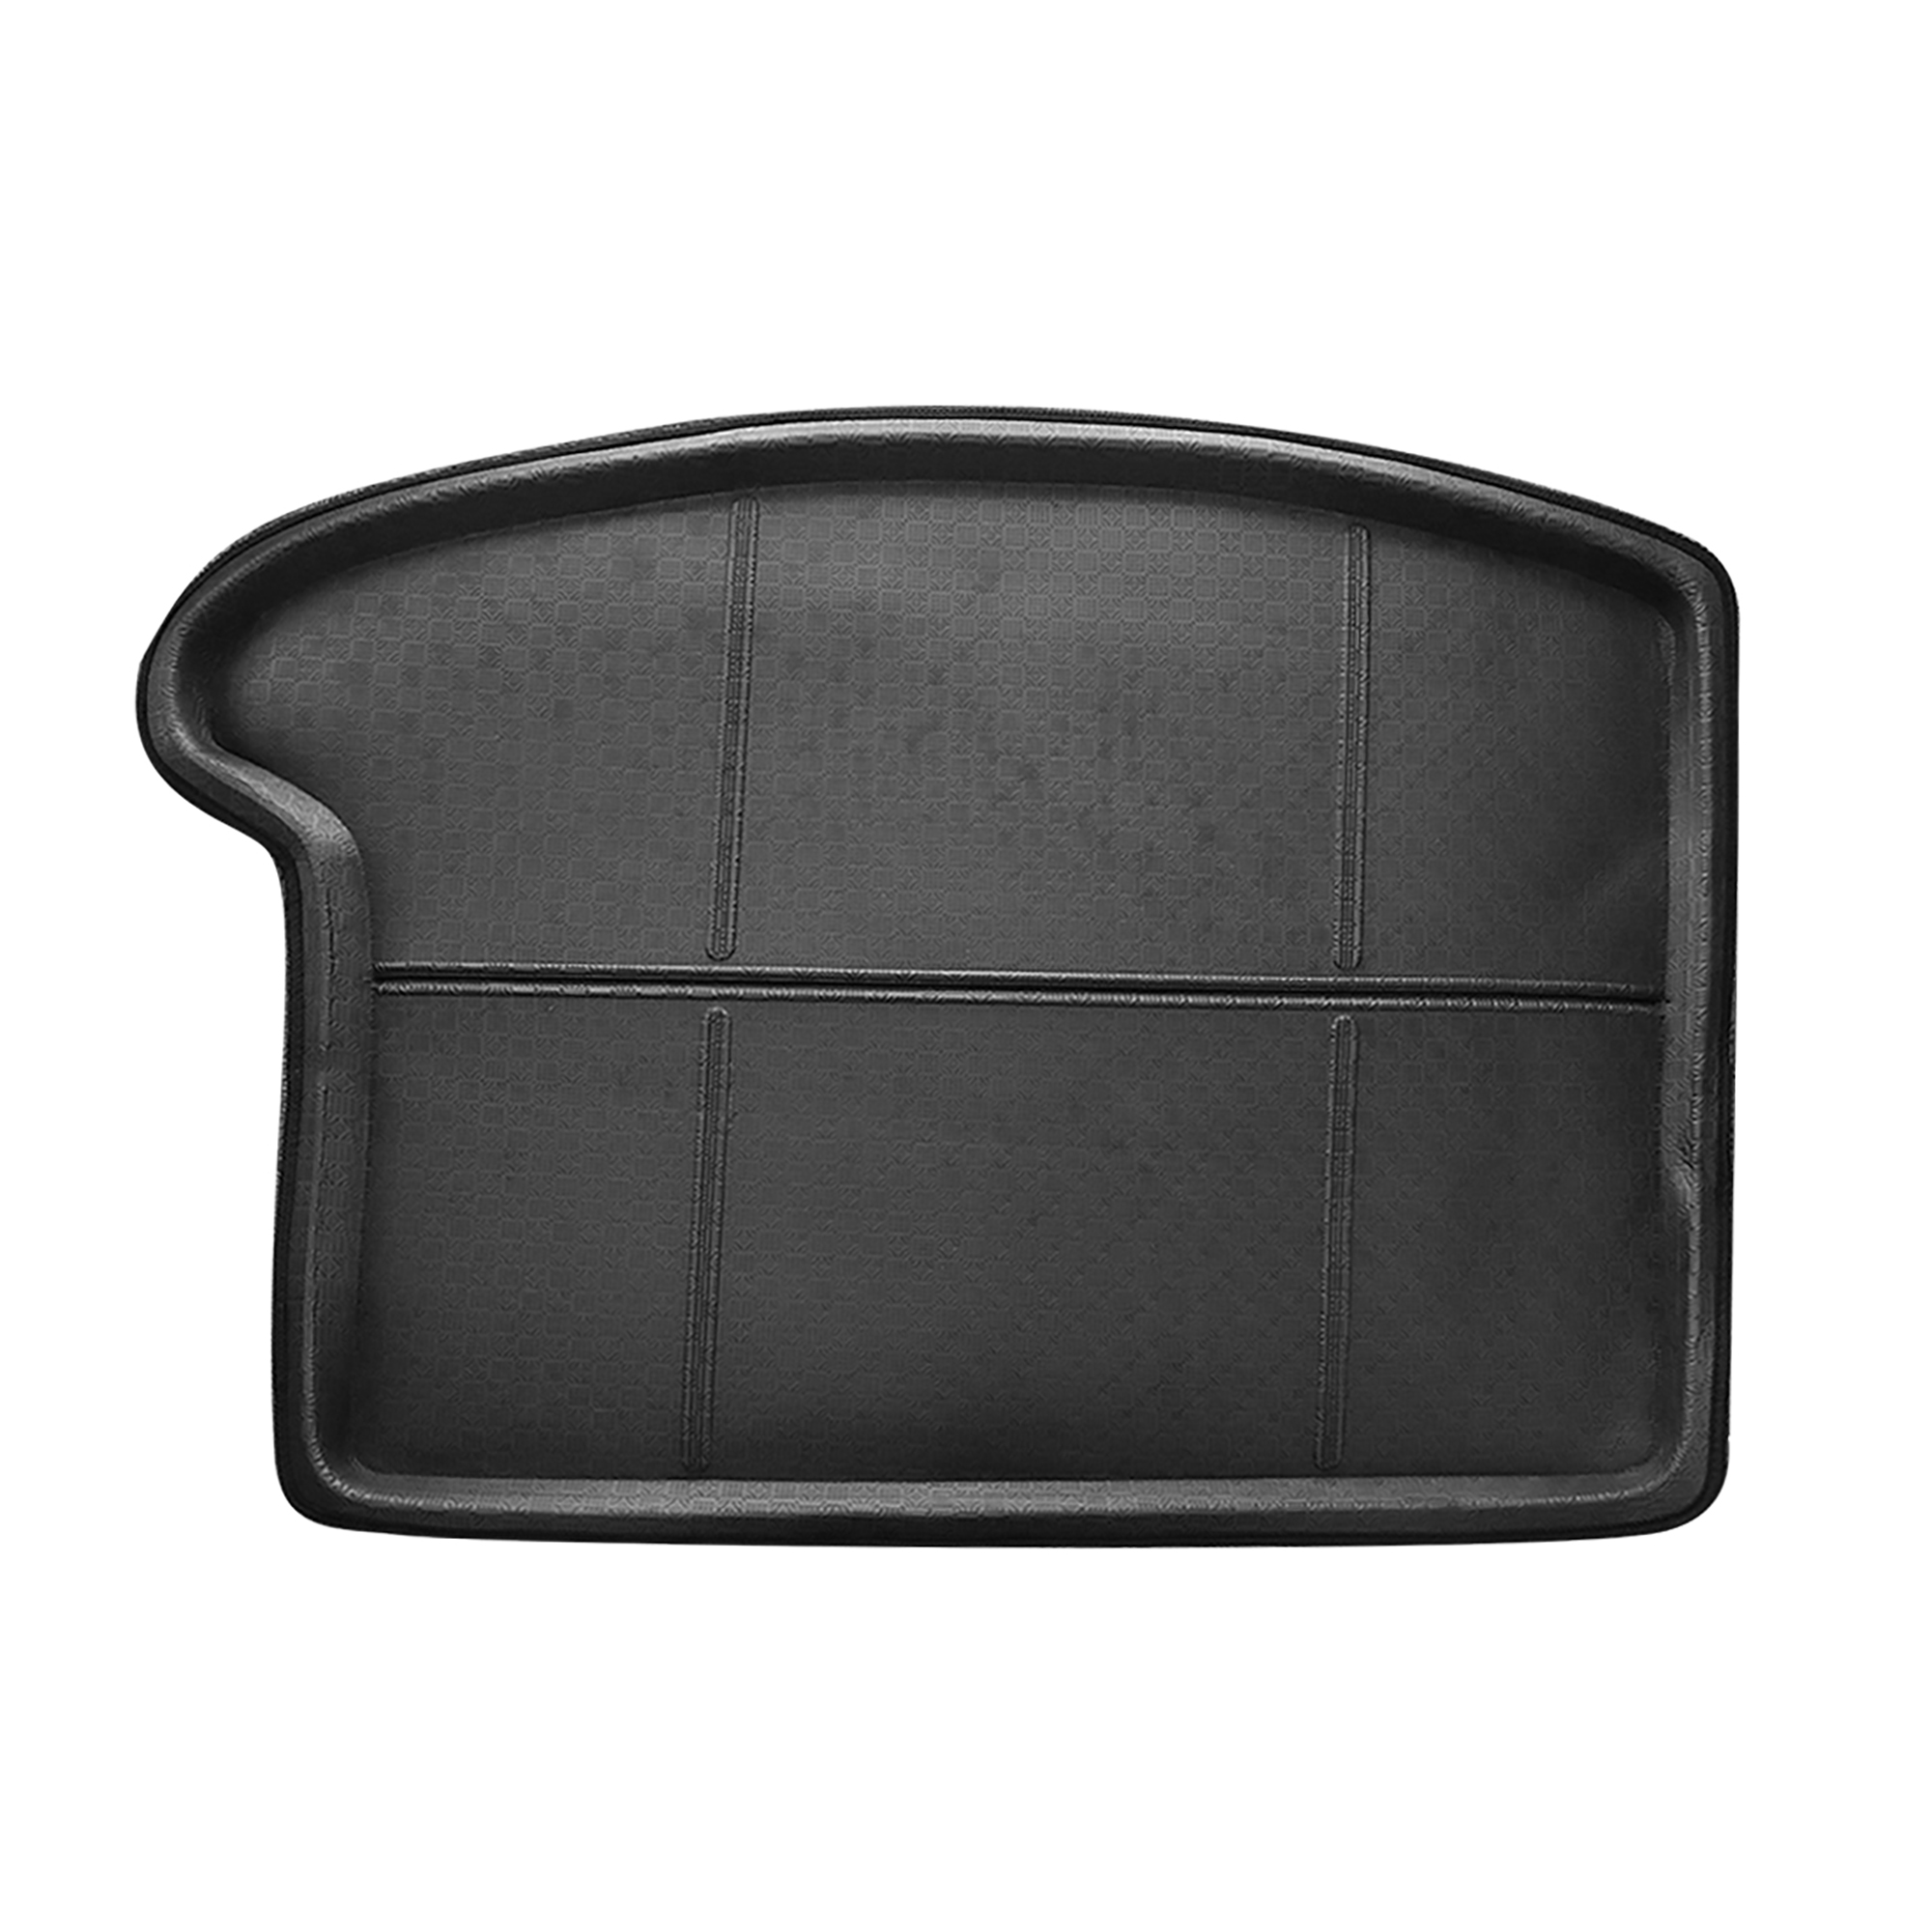 Unique Bargains All Weather Rubber Rear Trunk Liner Cargo Tray Cover Floor Mat for Mazda 3 2006-2013